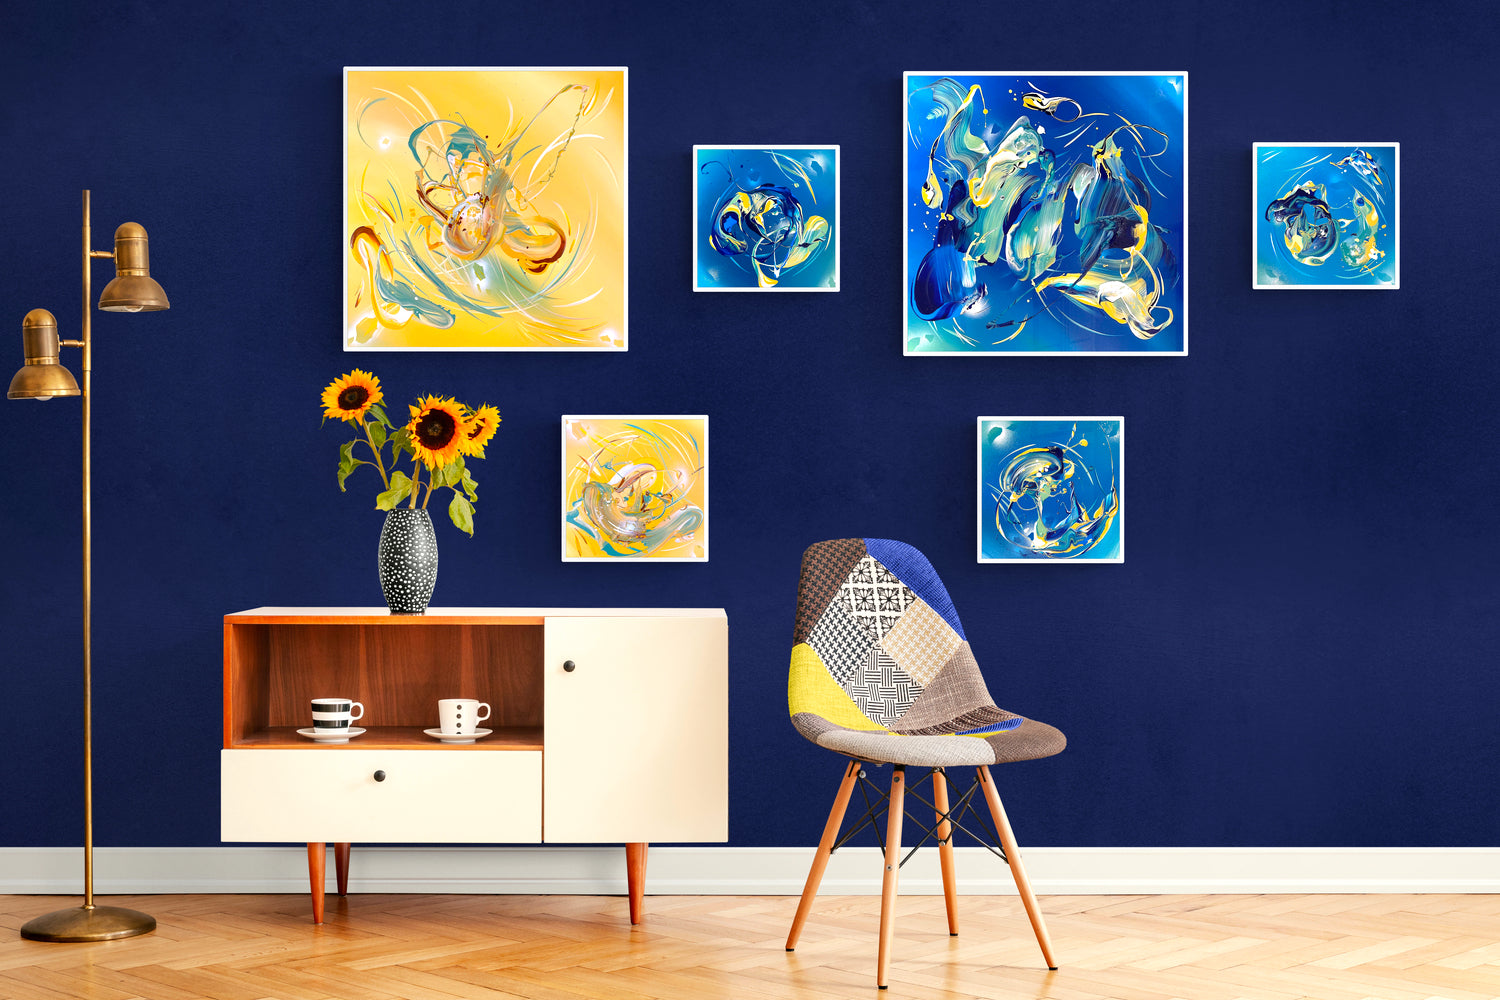 expressive abstract artist Michael Carini interprets Van Gogh's "The Starry Night" and his sunflowers  in his own signature style